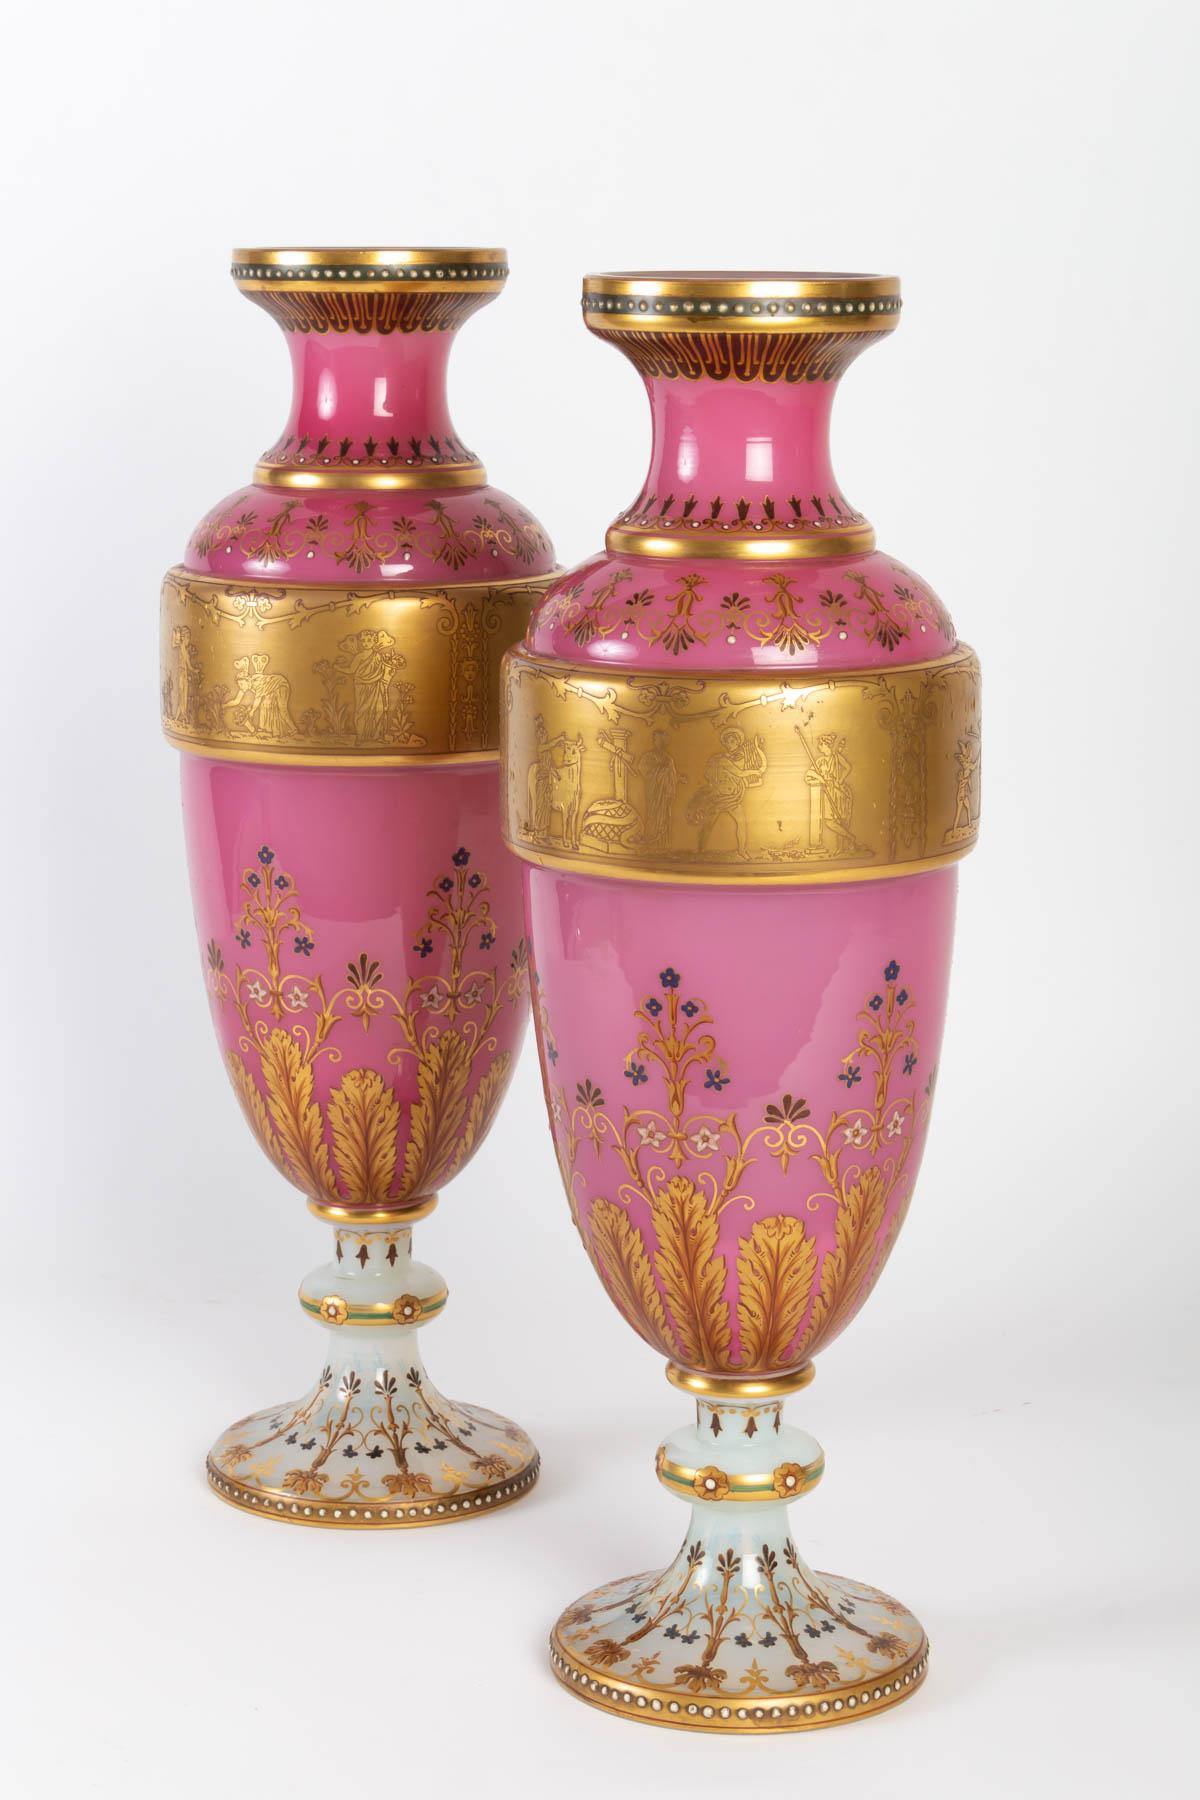 Pair of opaline vases, moser, lined with white and pink opaline, gilded plate with drawings of a fighting scene, 19th century, 1880, Napoleon III Period.
Measures: H 50cm, D 18cm.